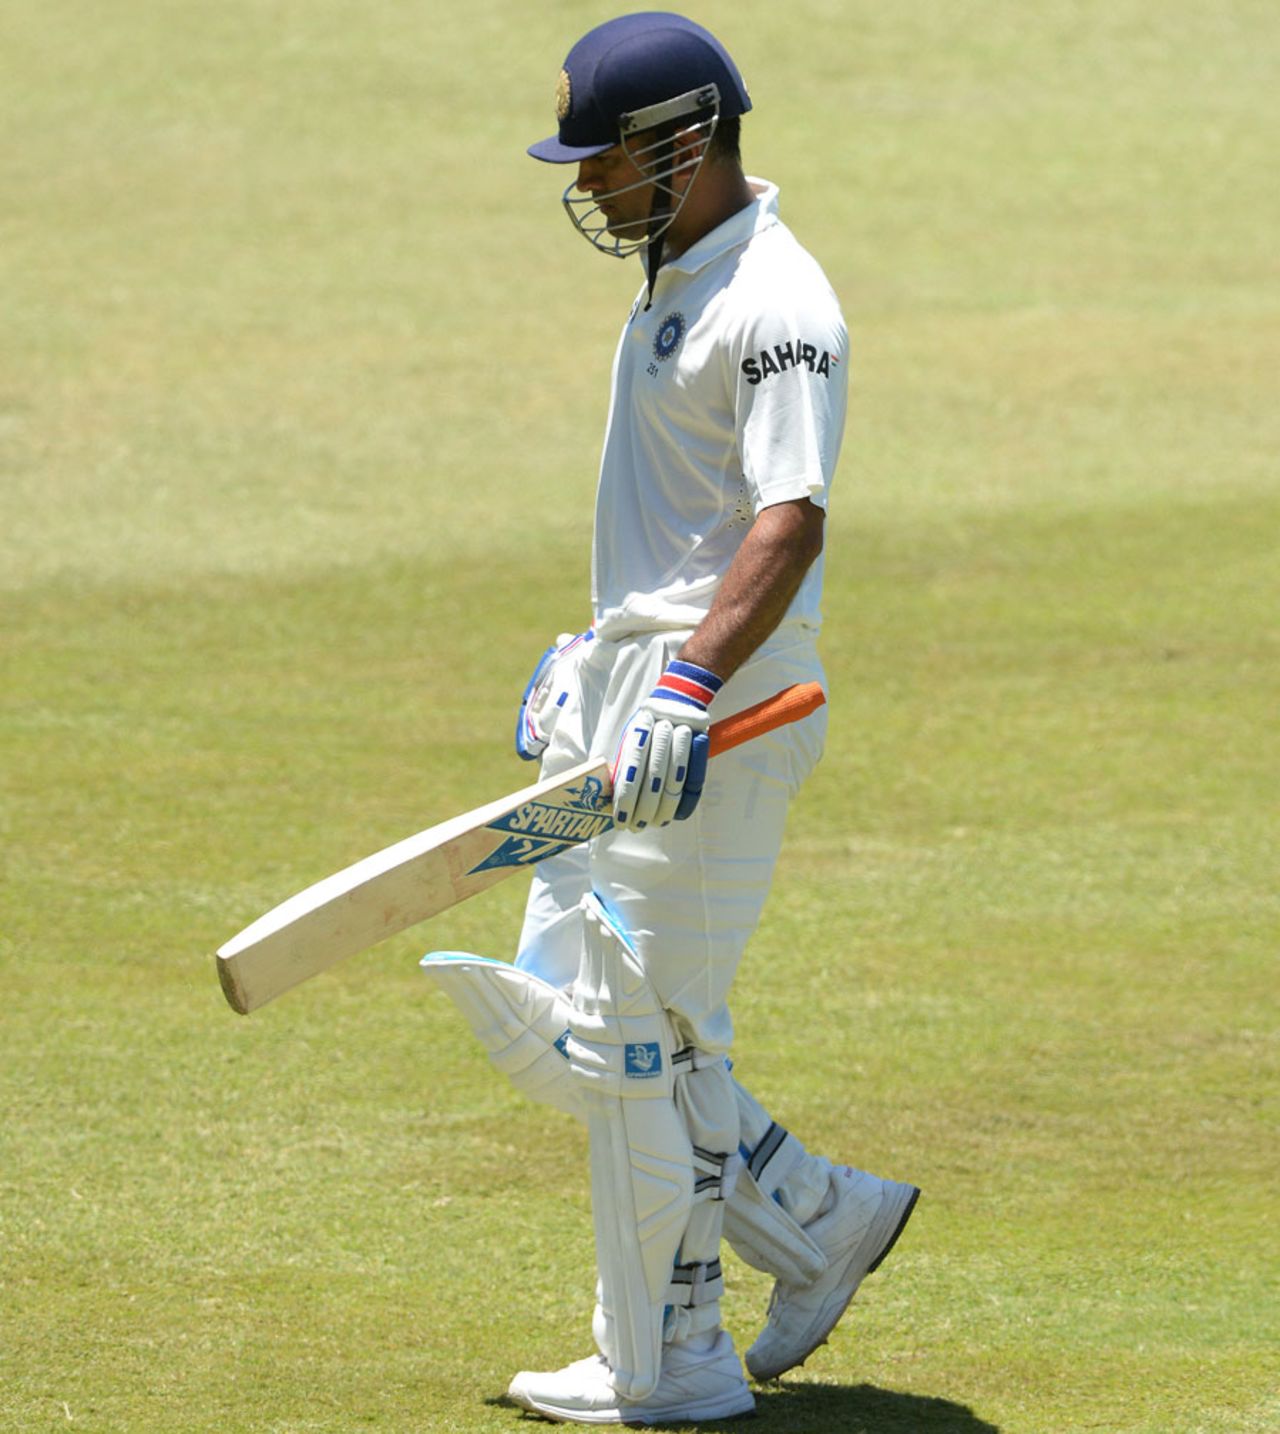 MS Dhoni walks back solemnly to the pavilion, South Africa v India, 2nd Test, Durban, 4th day, December 29, 2013